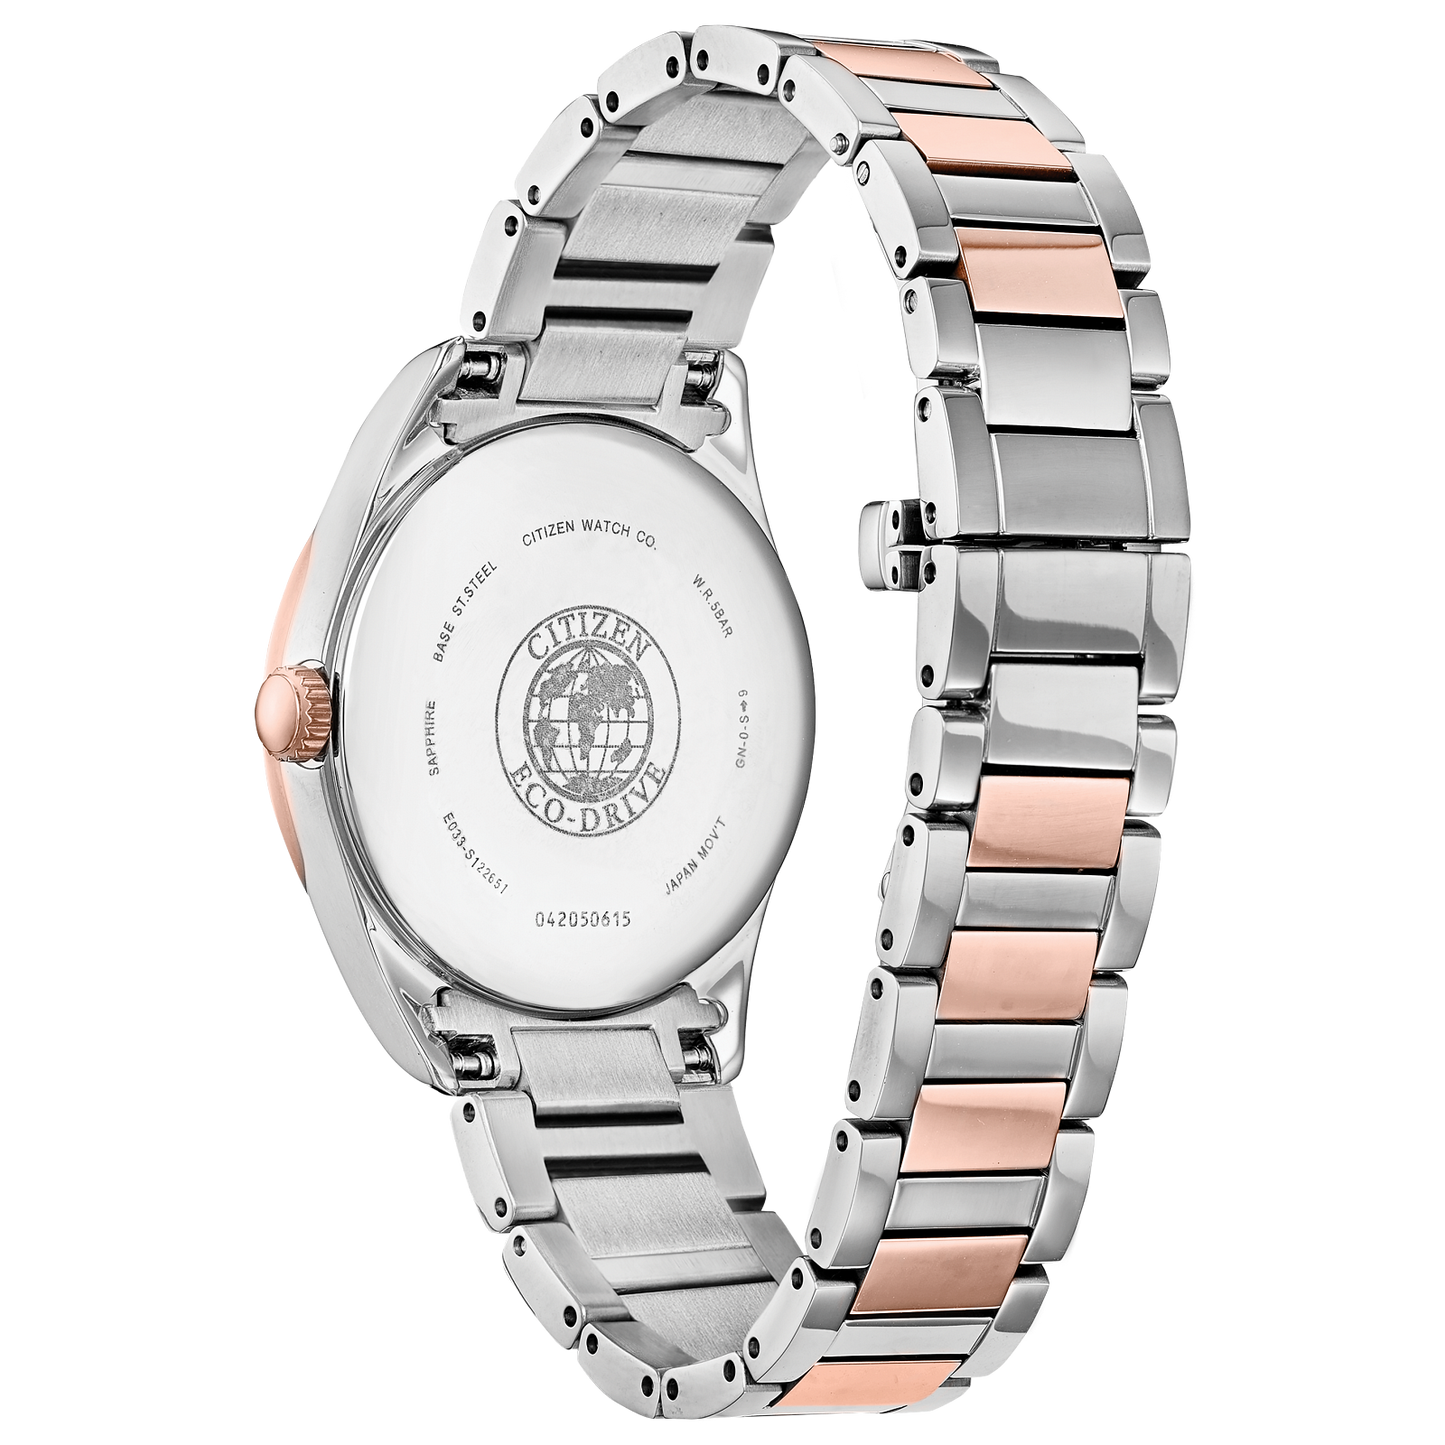 Two Tone Lds Citizen Eco-Drive With Mother Of Pearl Dial(Em0876-51D)